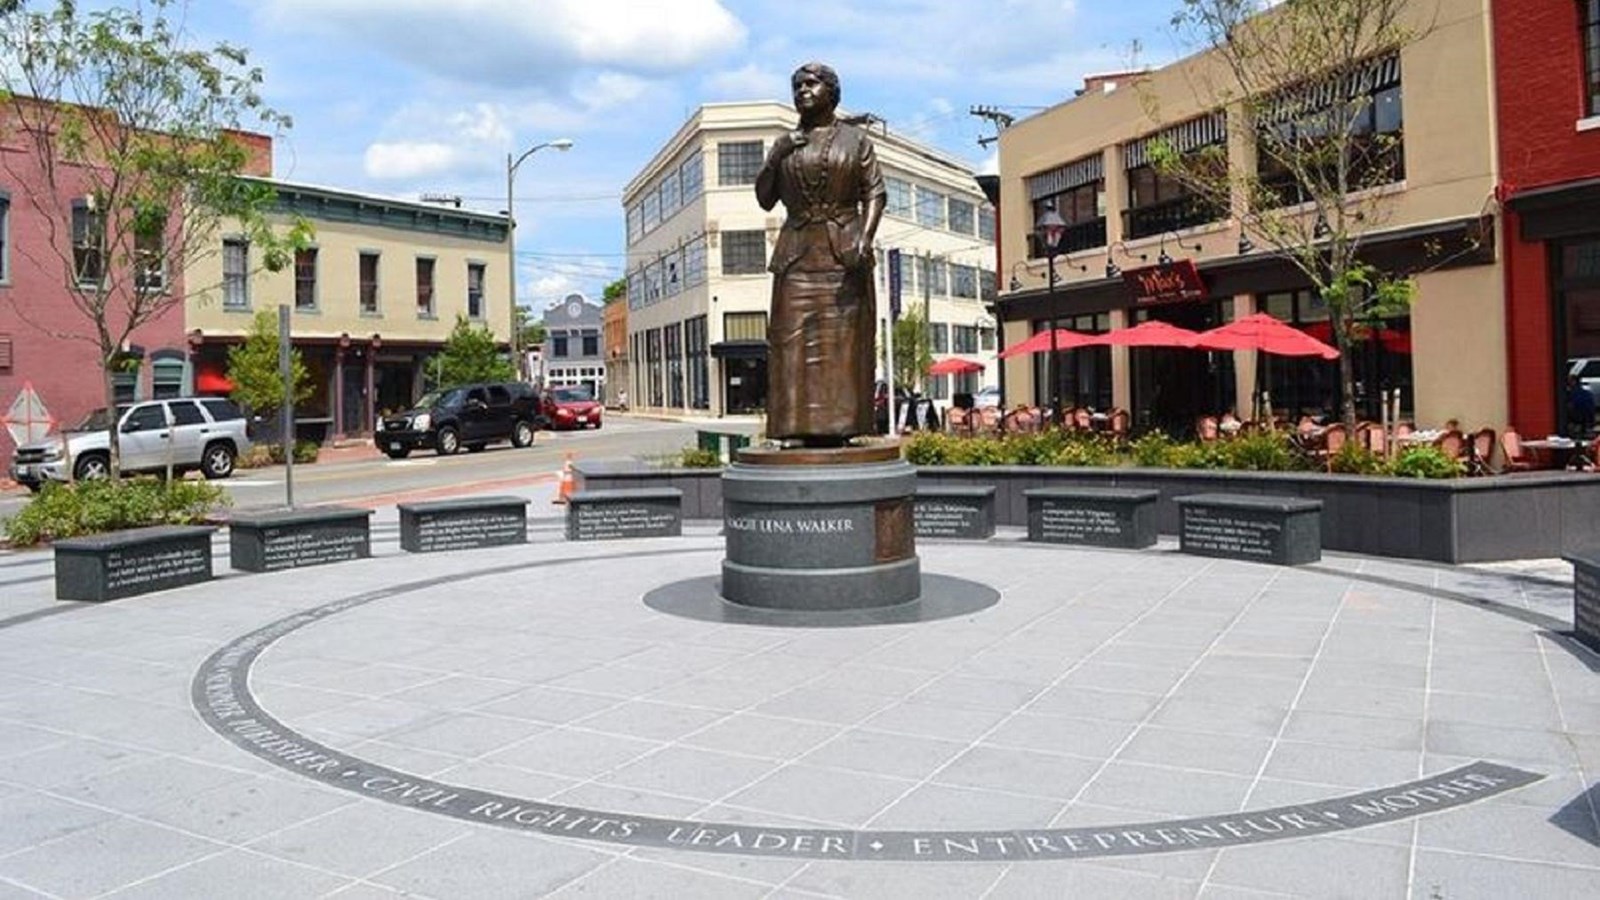 The Maggie L. Walker Memorial Plaza is an open area with a statue and benches honoring Mrs. Walker